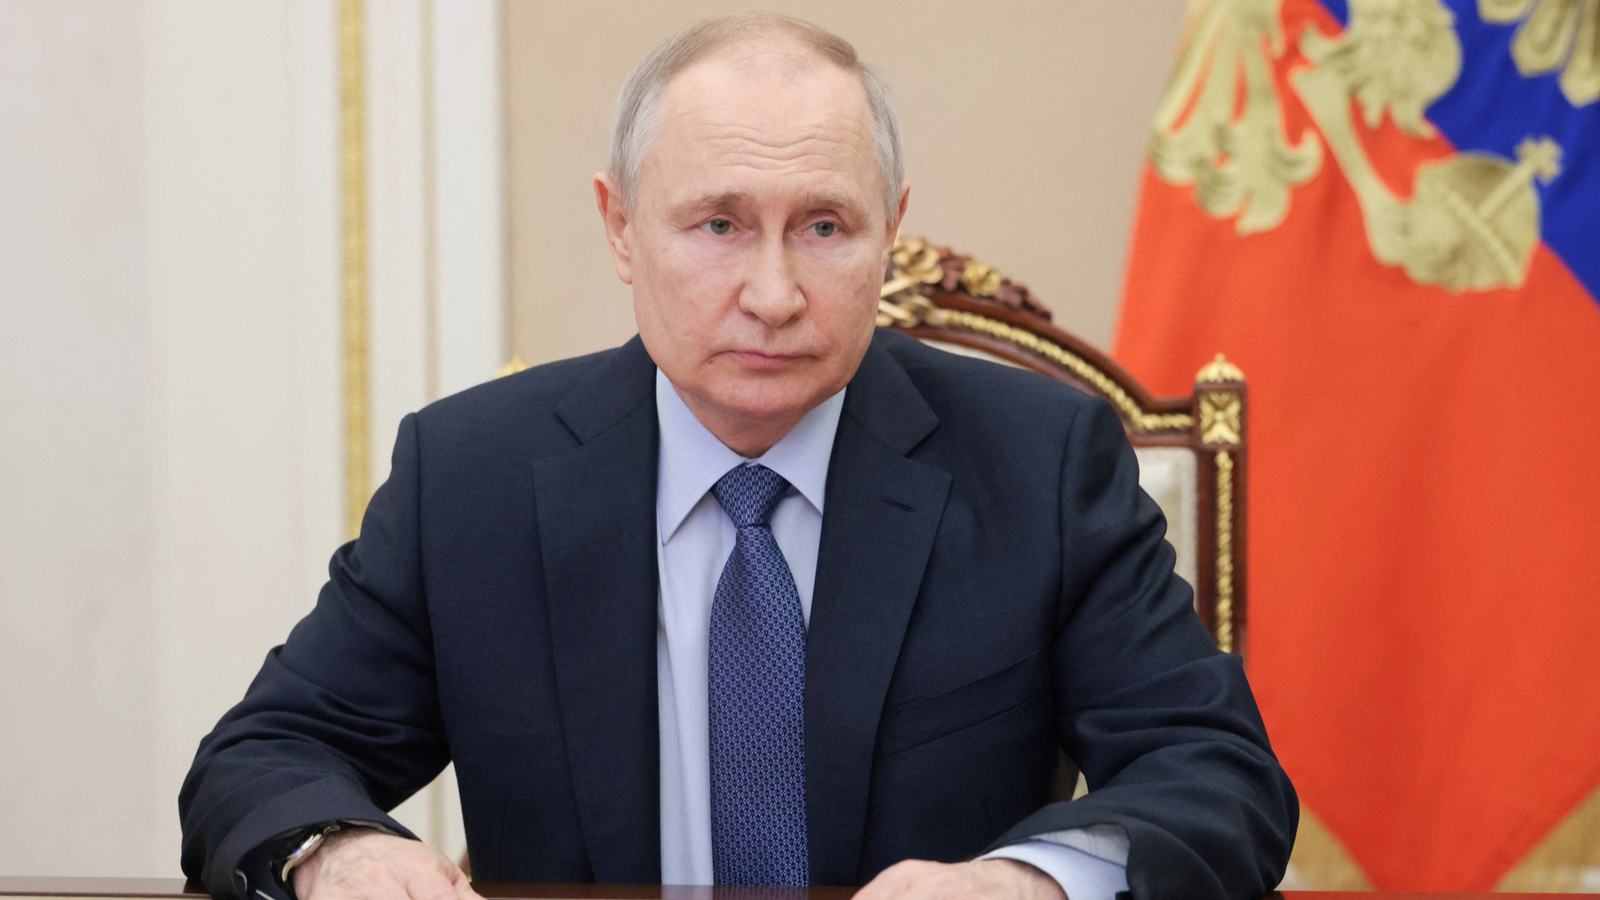 Russian President Vladimir Putin has announced plans to station tactical nuclear weapons in Belarus - NATO has labelled the move as dangerous./Reuters via third party.